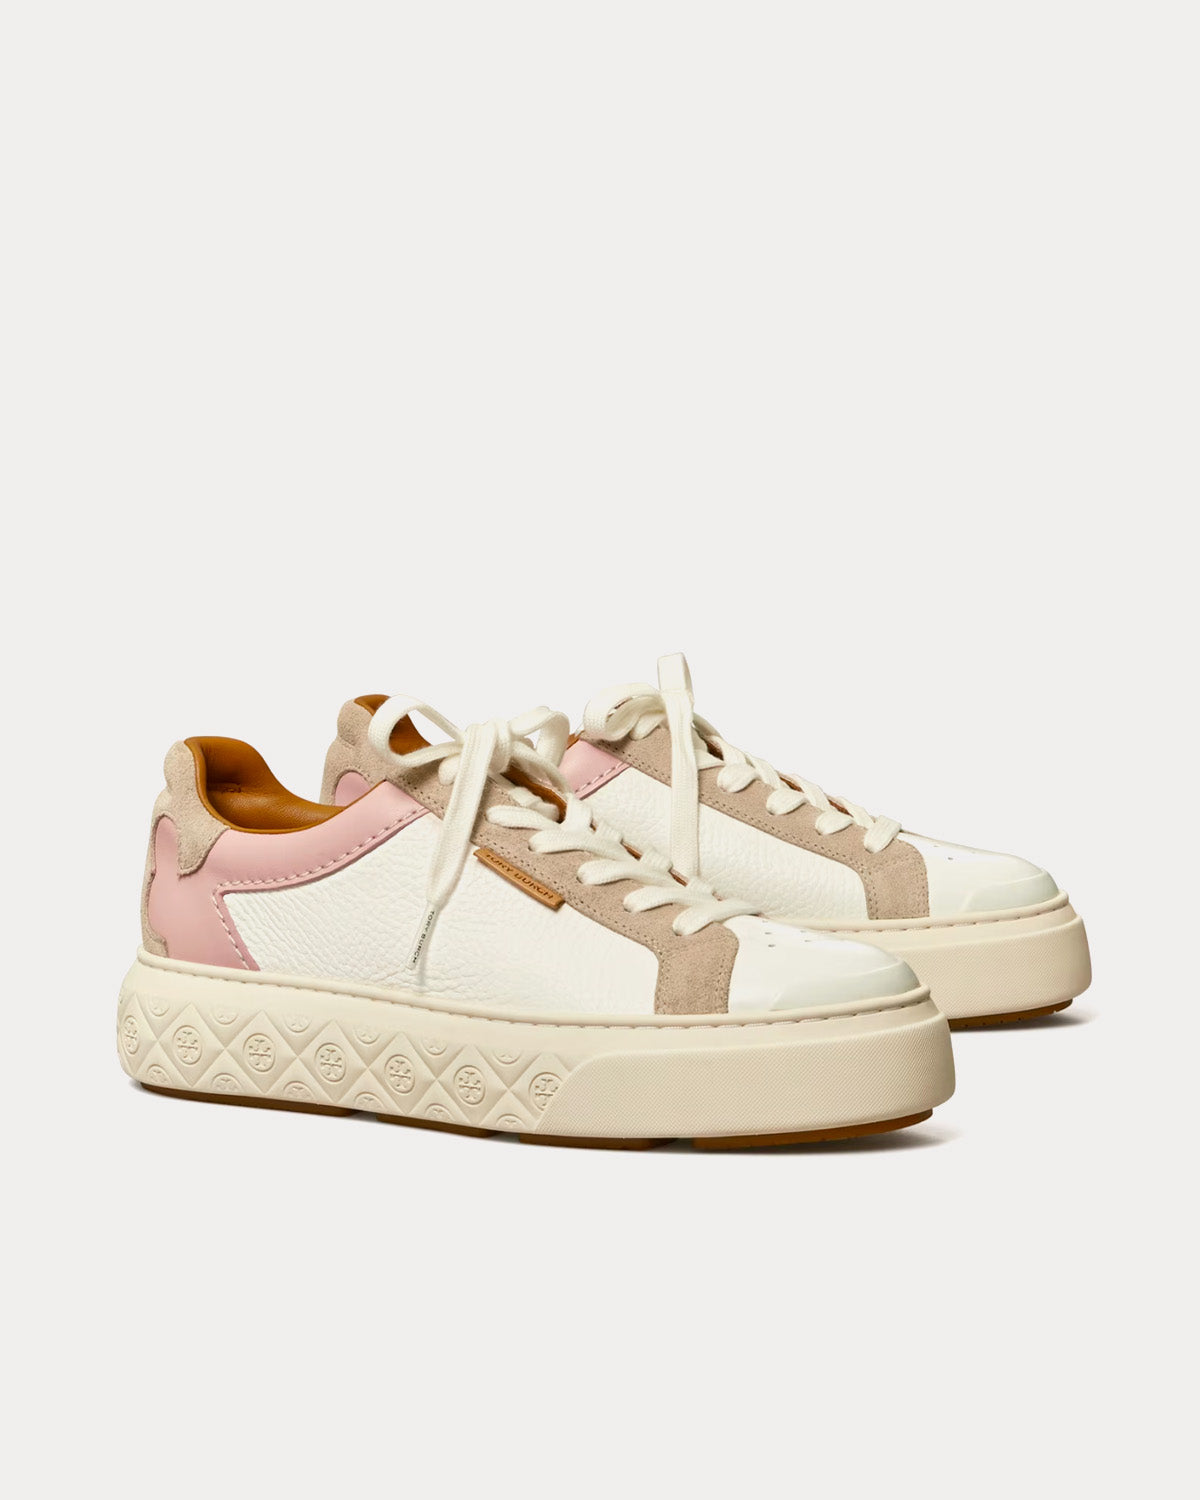 Tory Burch Ladybug New Ivory / Calcare / Rosa Low Top Sneakers 